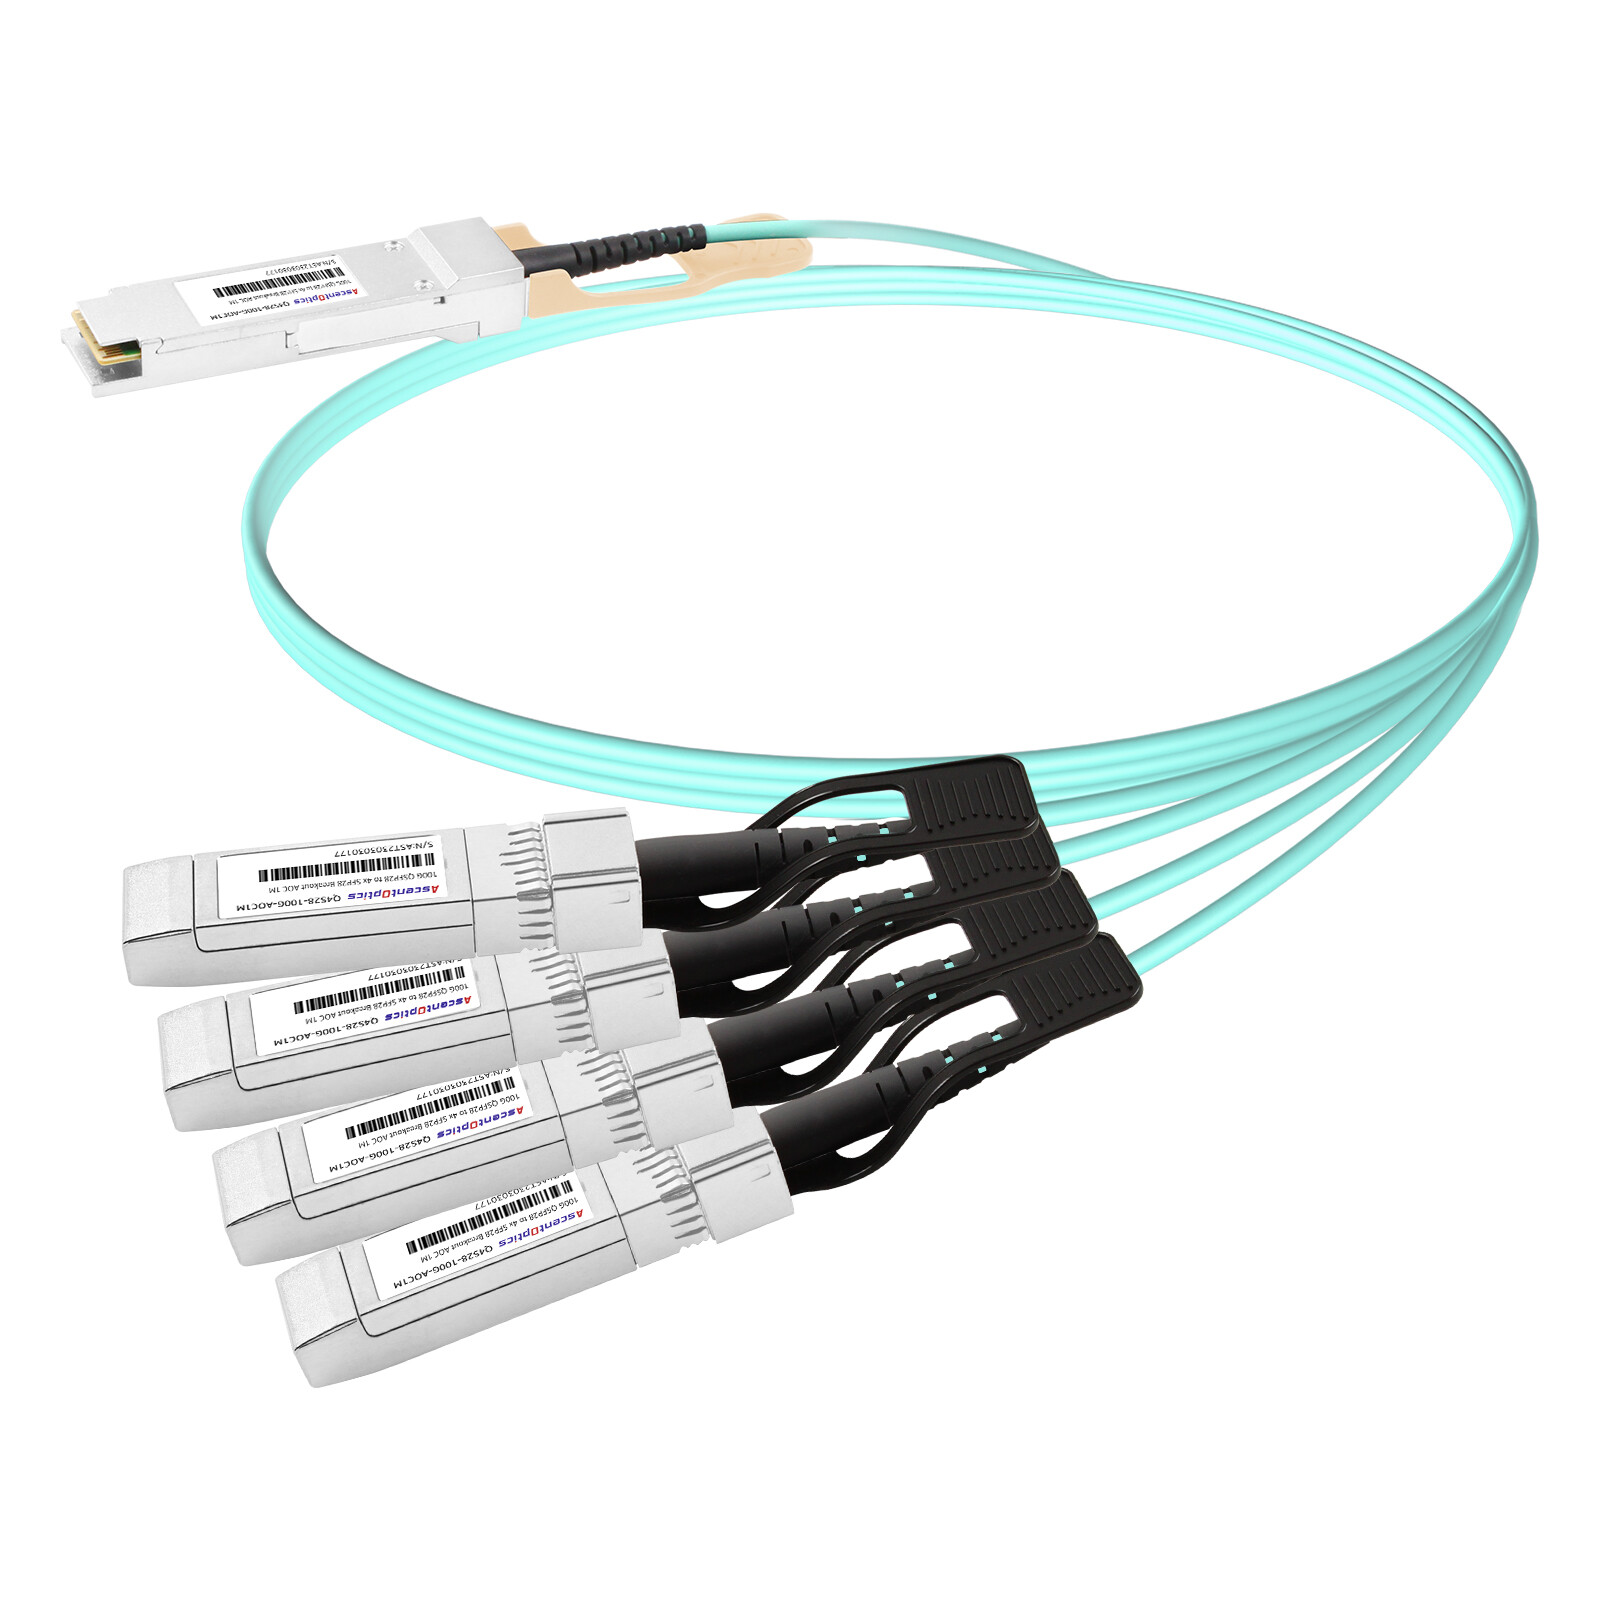 100G QSFP28 to 4x 25G SFP28 Breakout AOC Cable,1 Meter